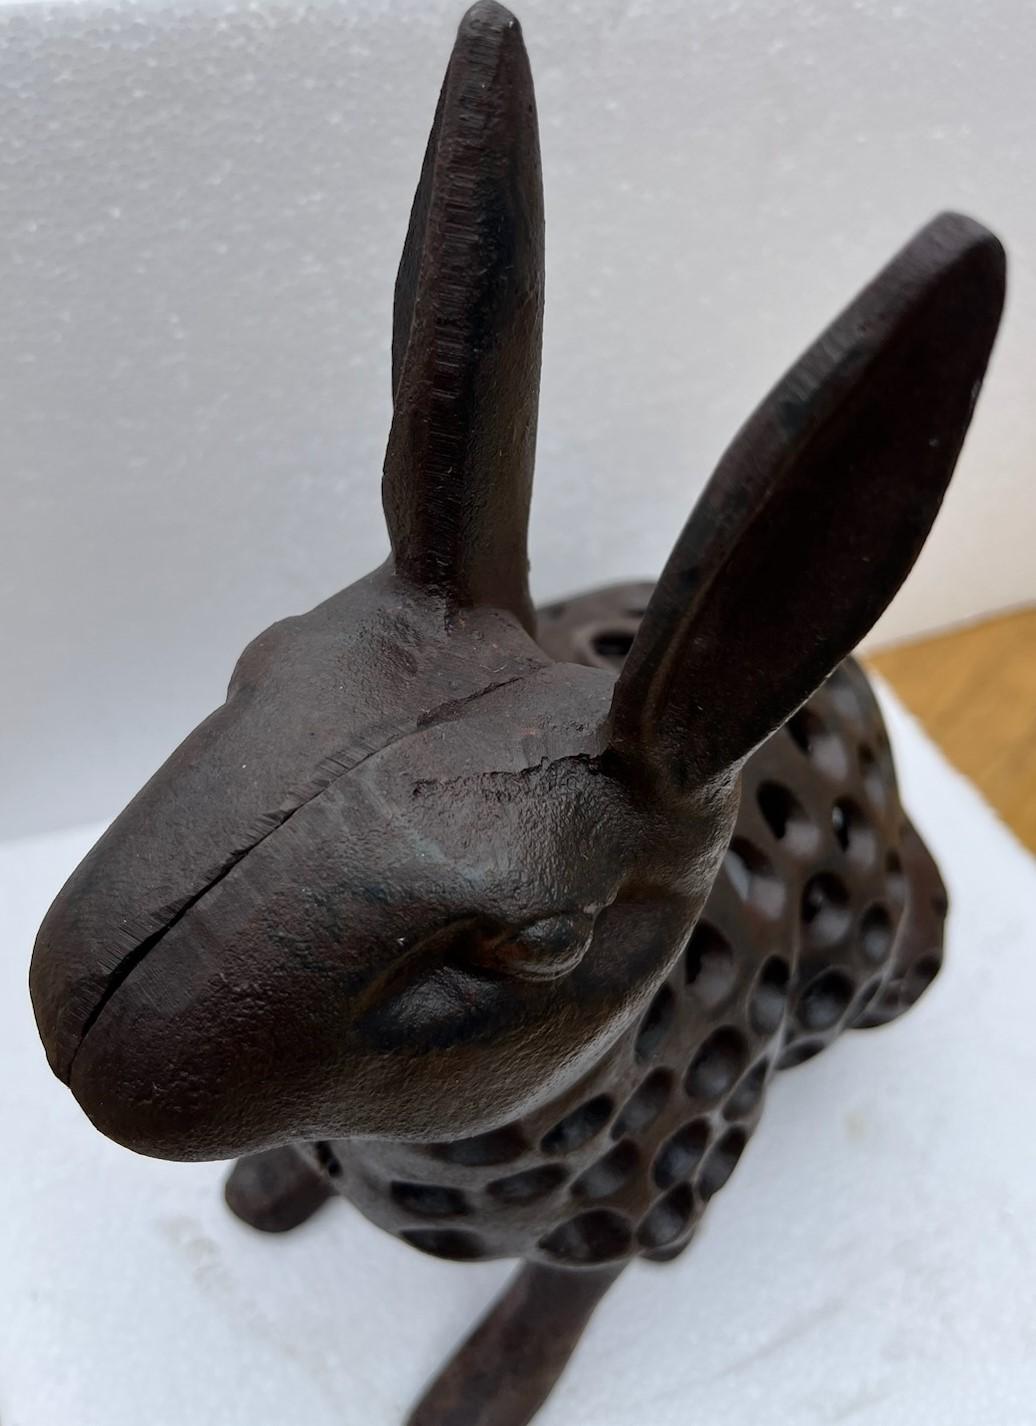 20th century Cast iron rabbit doorstop with a candle space to create a lantern. This heavy rabbit could even sit on the front porch or patio.